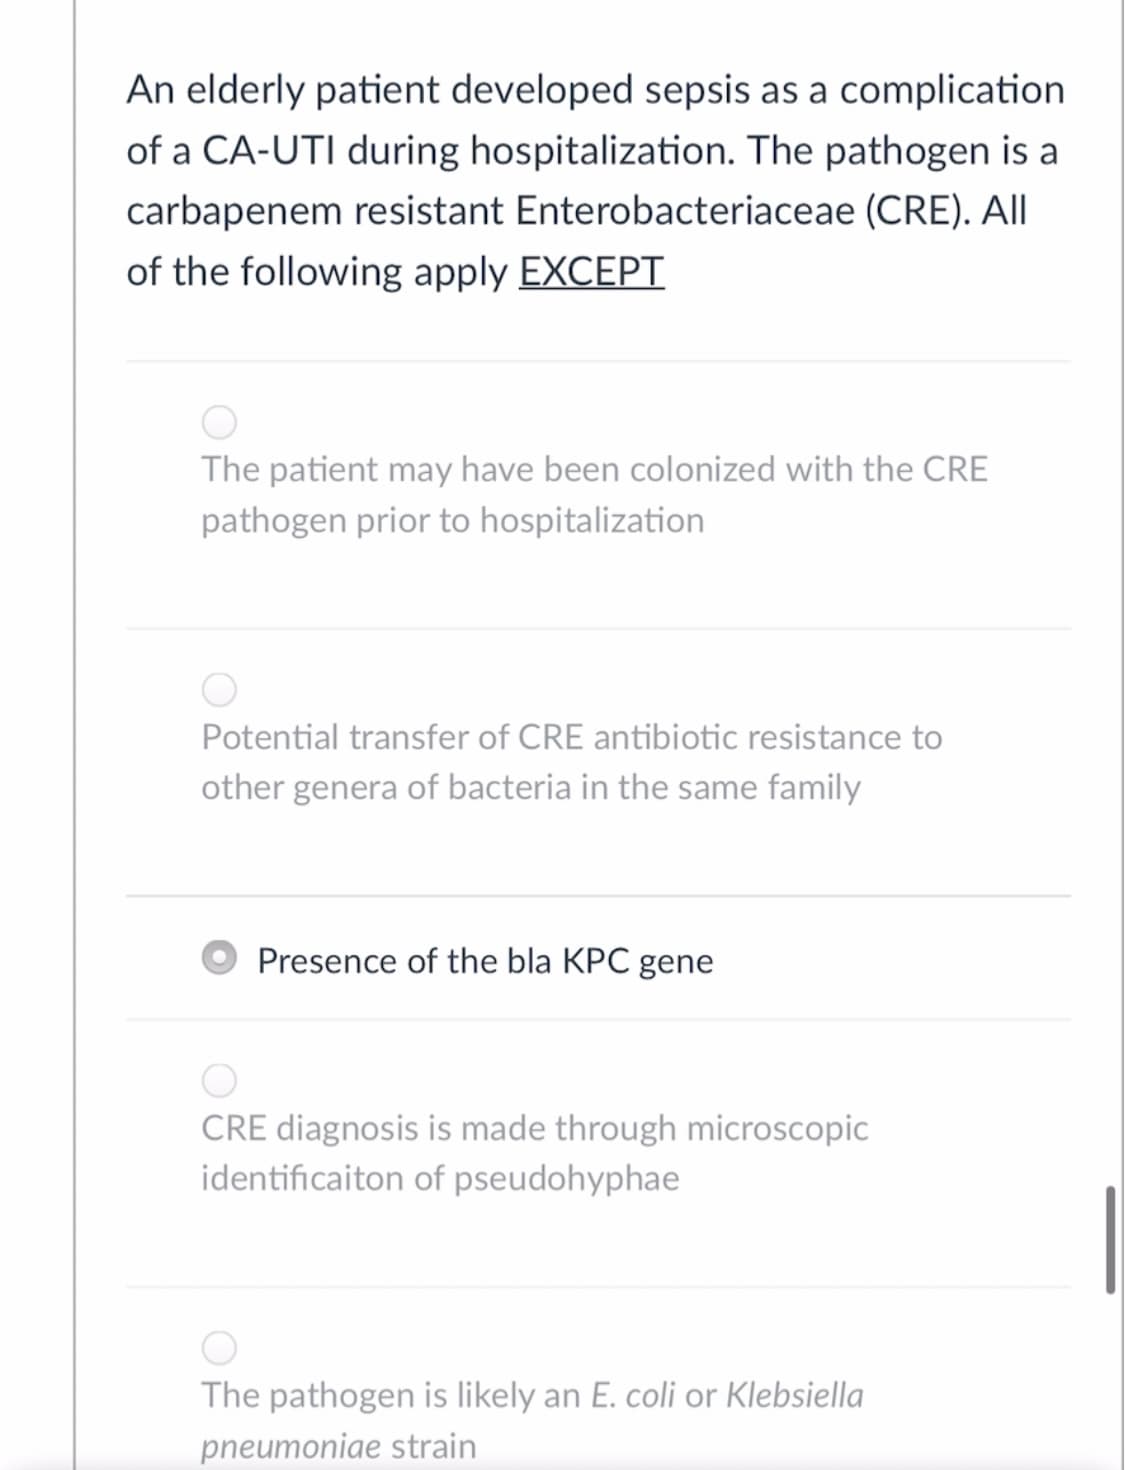 An elderly patient developed sepsis as a complication
of a CA-UTI during hospitalization. The pathogen is a
carbapenem resistant Enterobacteriaceae (CRE). All
of the following apply EXCEPT
The patient may have been colonized with the CRE
pathogen prior to hospitalization
Potential transfer of CRE antibiotic resistance to
other genera of bacteria in the same family
Presence of the bla KPC gene
CRE diagnosis is made through microscopic
identificaiton of pseudohyphae
The pathogen is likely an E. coli or Klebsiella
pneumoniae strain
